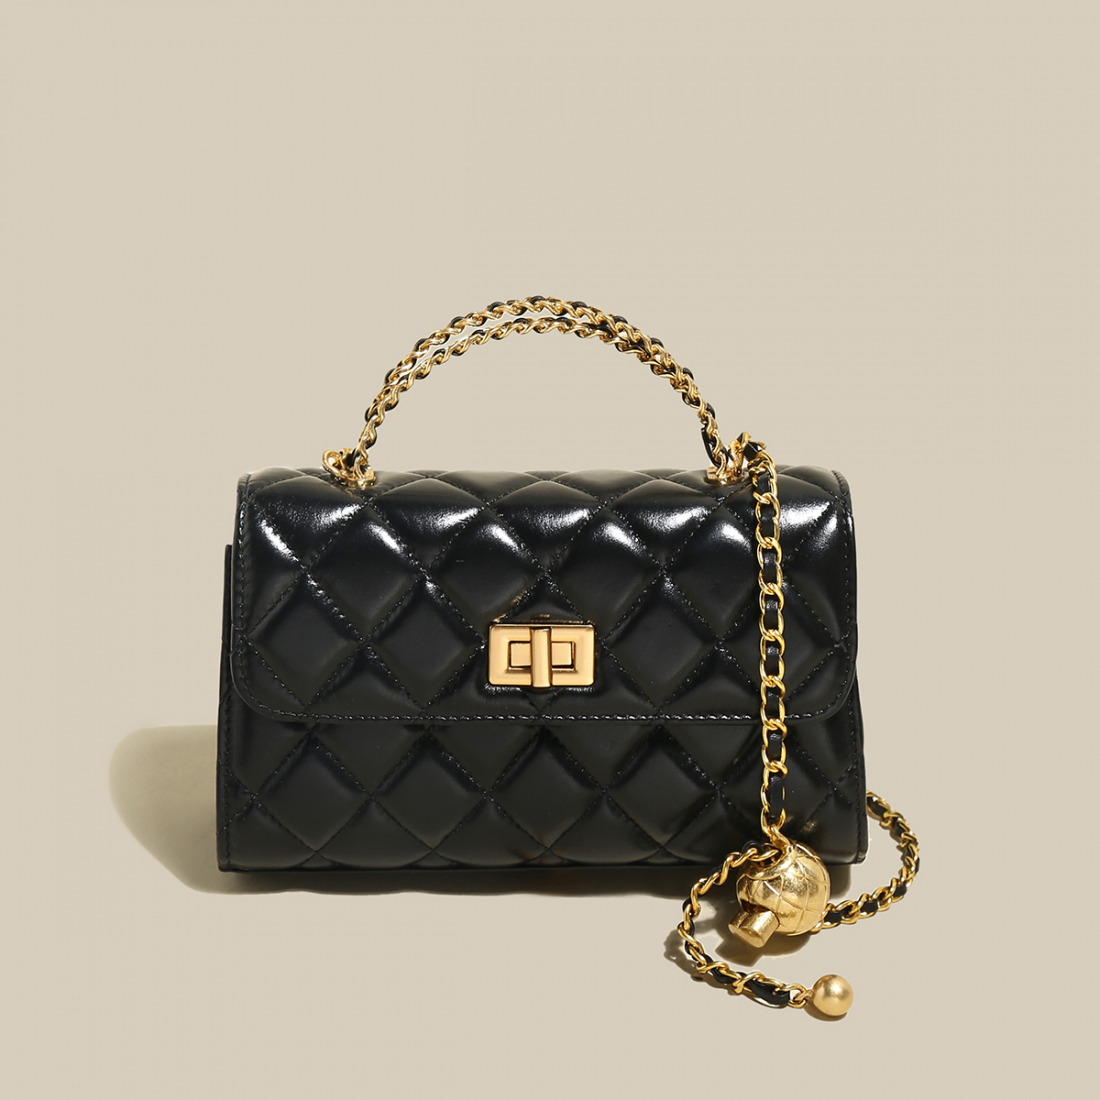 Women's 'Mini Quilted Chain Strap' Shoulder Bag